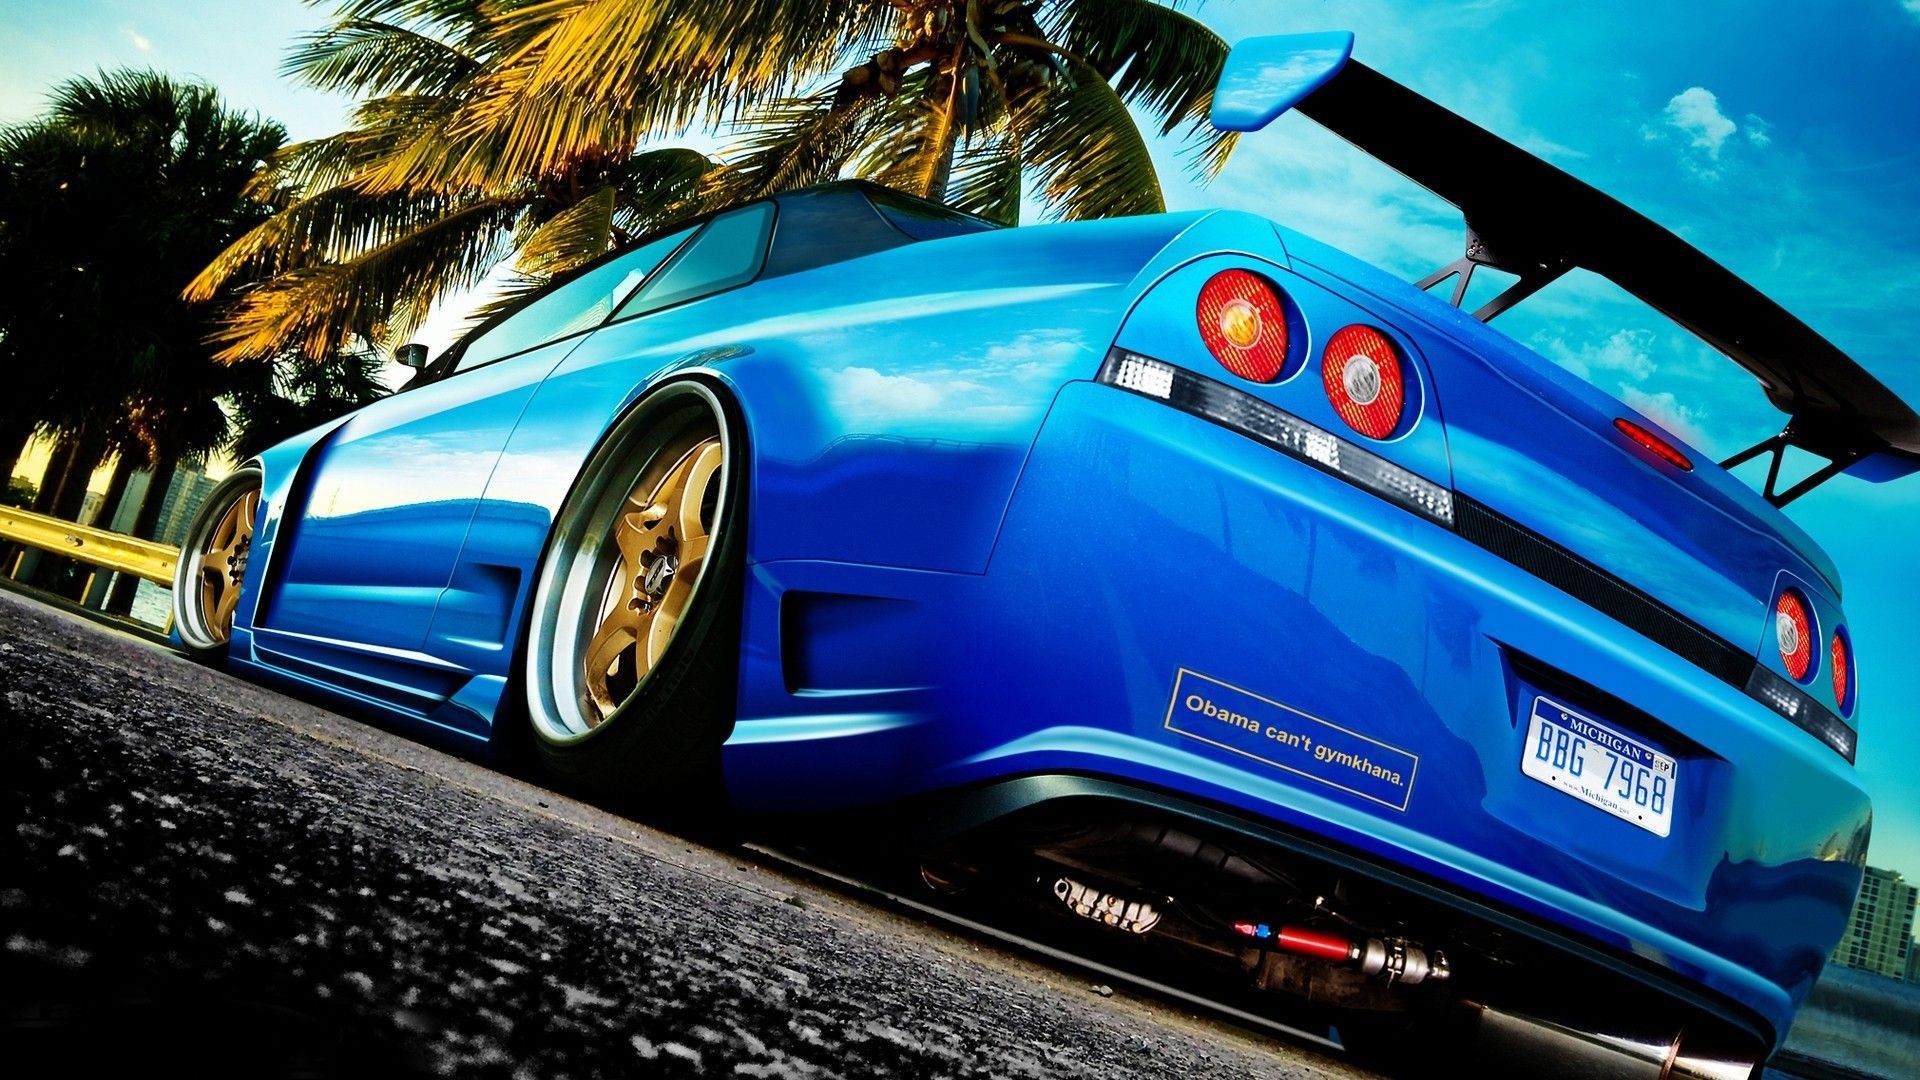 Awesome Blue Cars Wallpaper Free Awesome Blue Cars Background